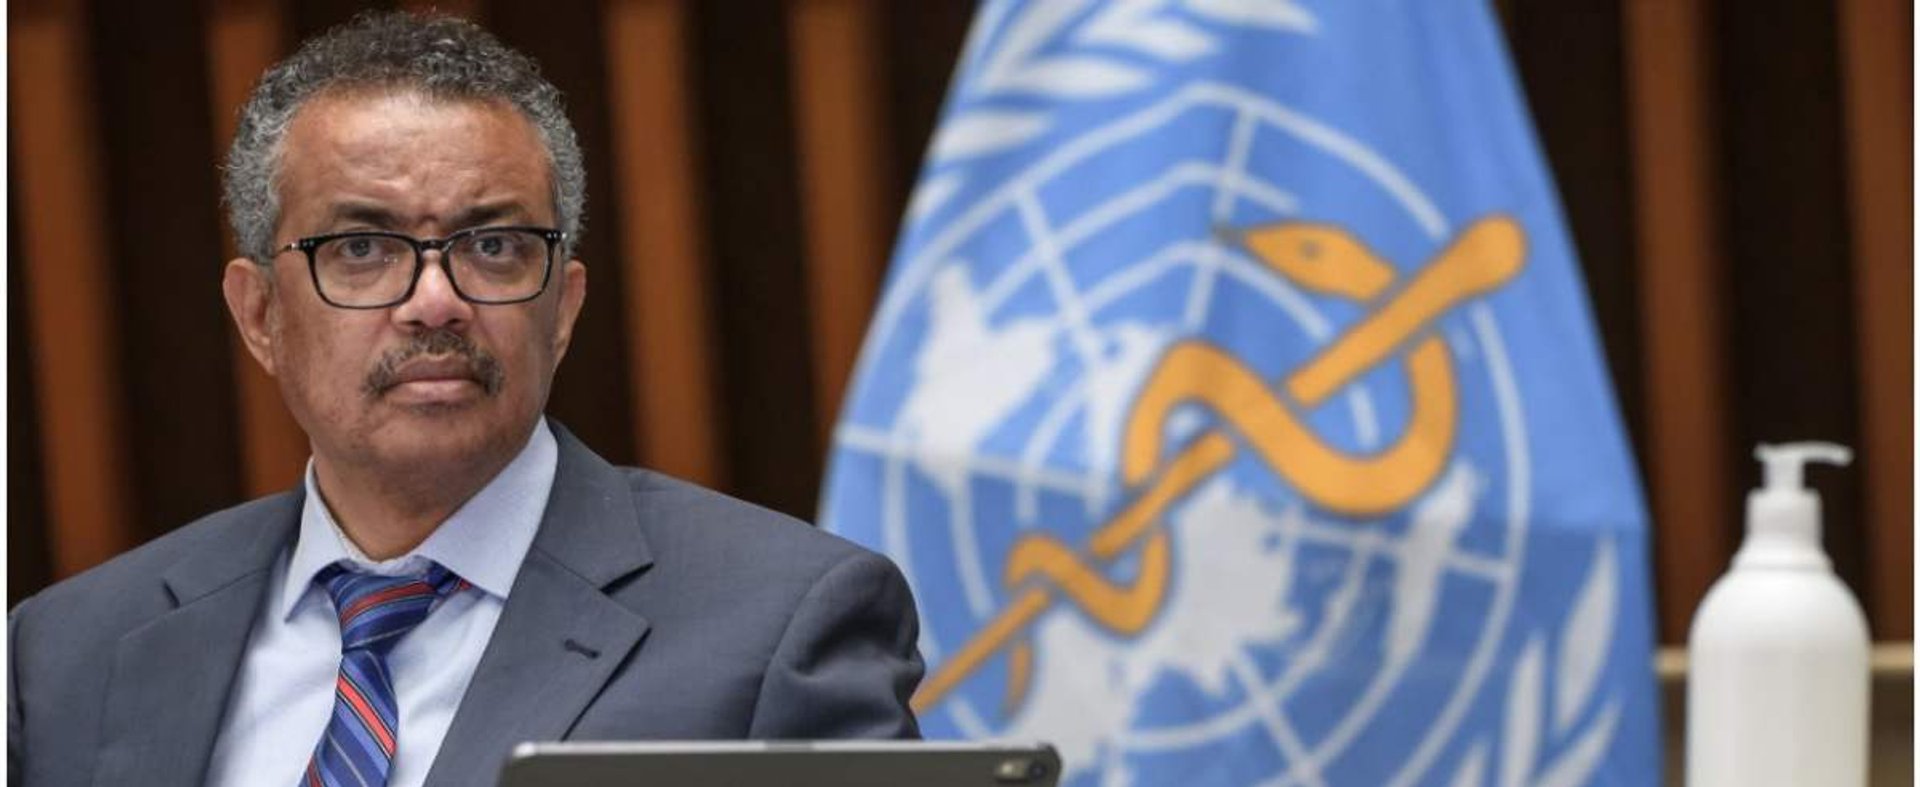 World Health Organization (WHO) Director-General Tedros Adhanom Ghebreyesus attends a press conference organised by the Geneva Association of United Nations Correspondents (ACANU) amid the COVID-19 outbreak, caused by the novel coronavirus, on July 3, 202